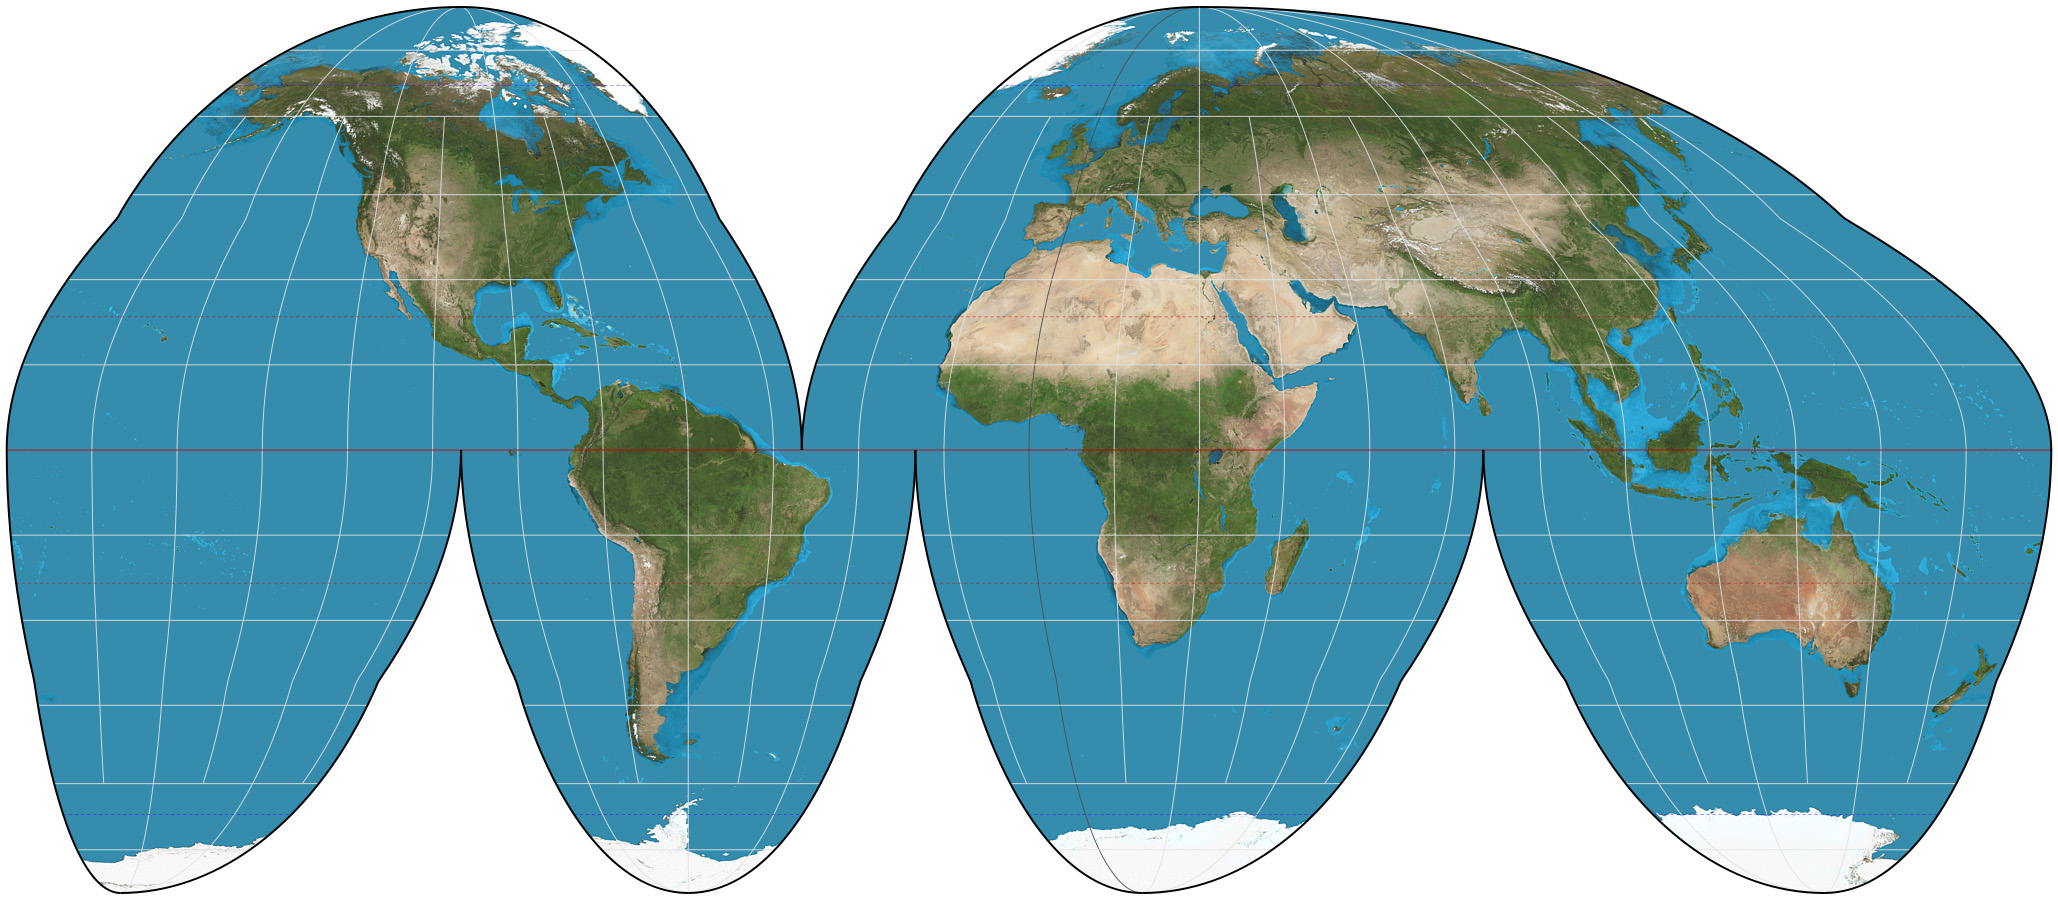 <p>It shows the continents proportionally sized to each other, however its use of distances, directions, and angles are not accurately shown because of distortion</p>